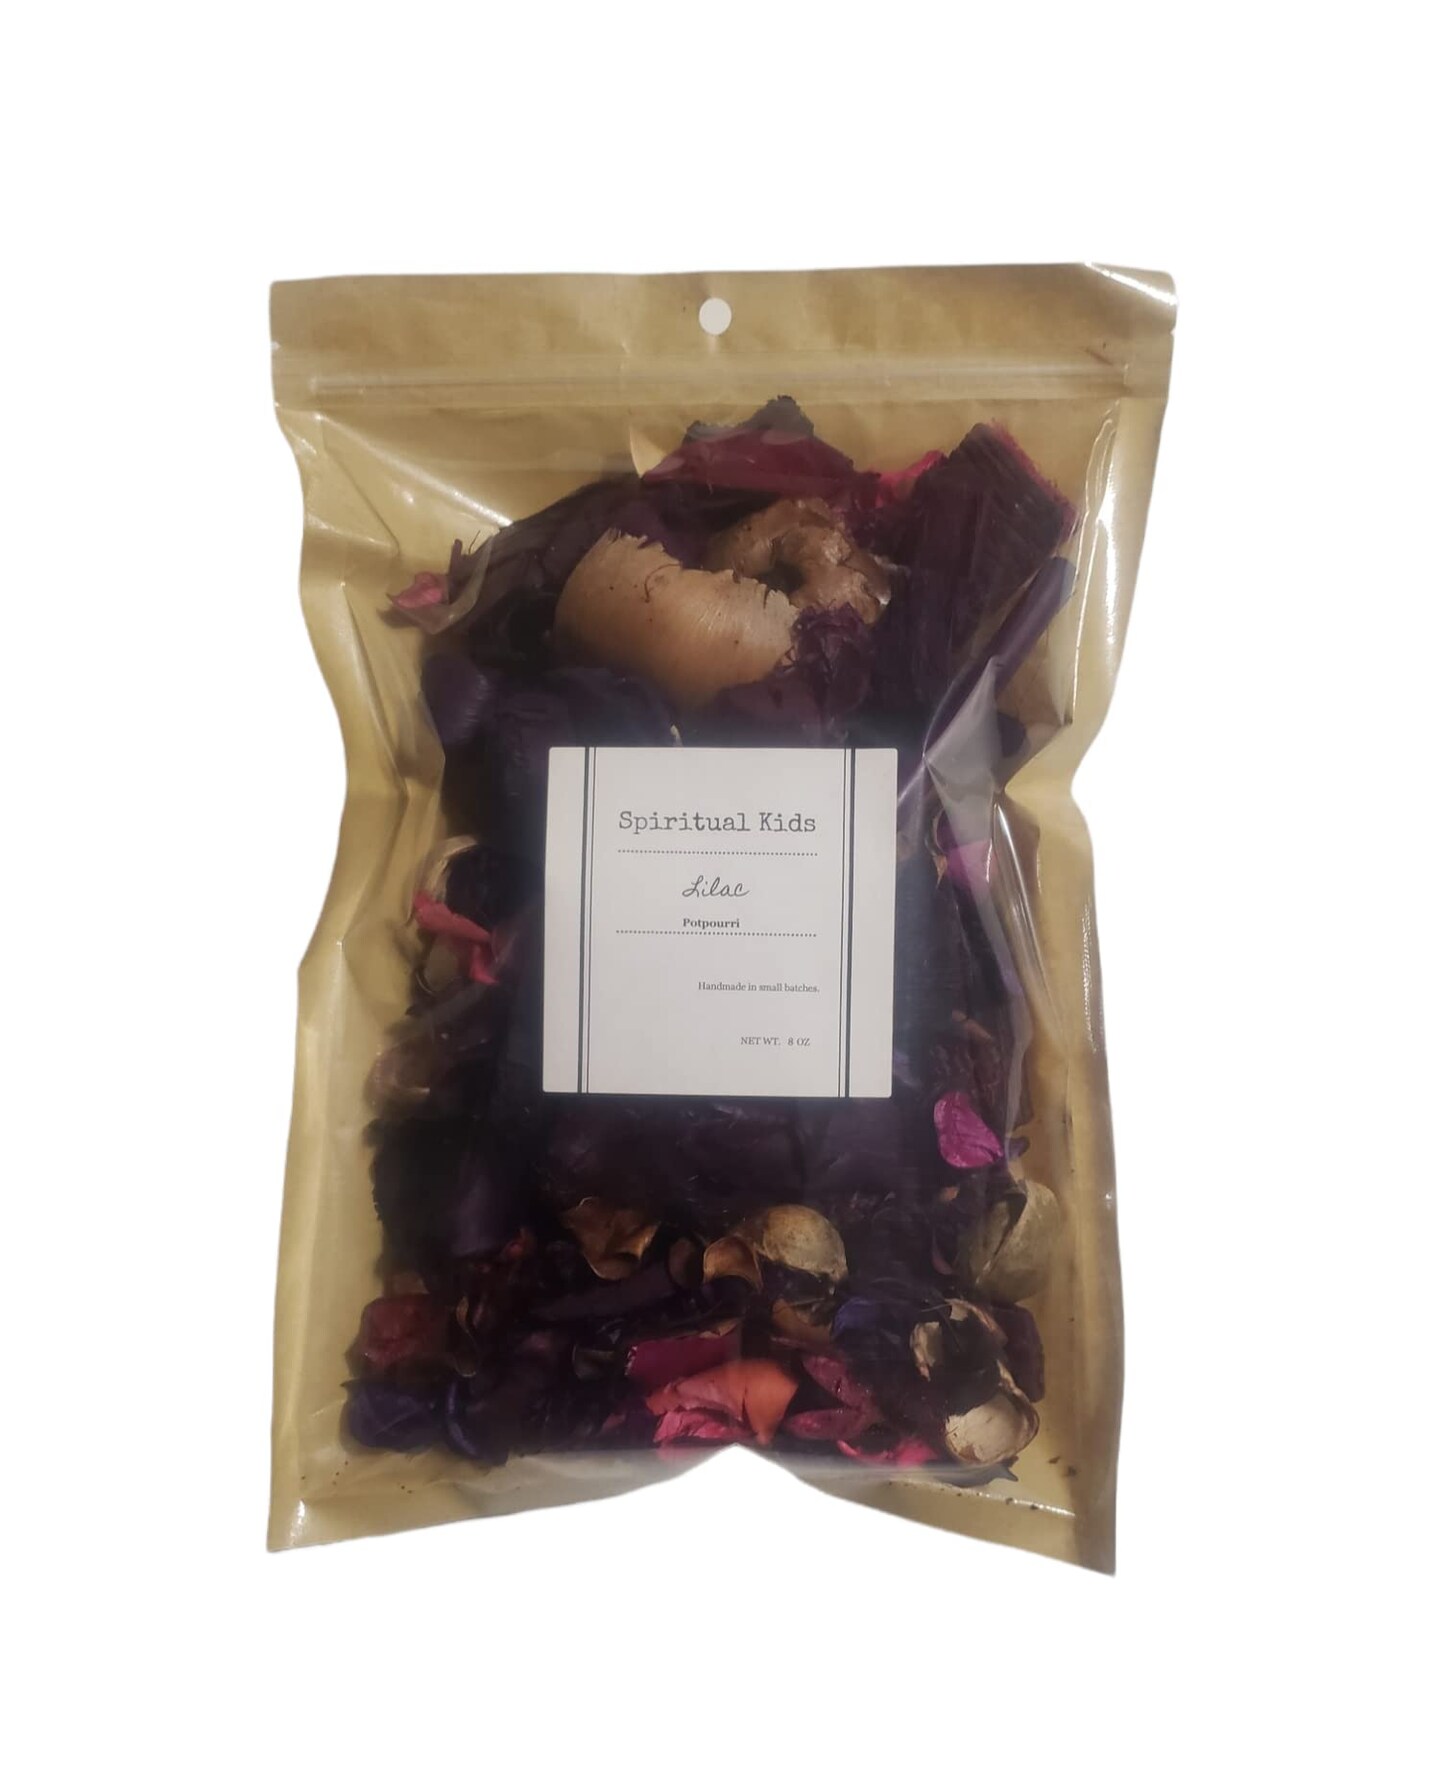 Lilac Potpourri 8oz Bag Made with Fragrant/Essential Oils HandMade FREE SHIPPING SCENTED House Warming Gift| Wedding Favors